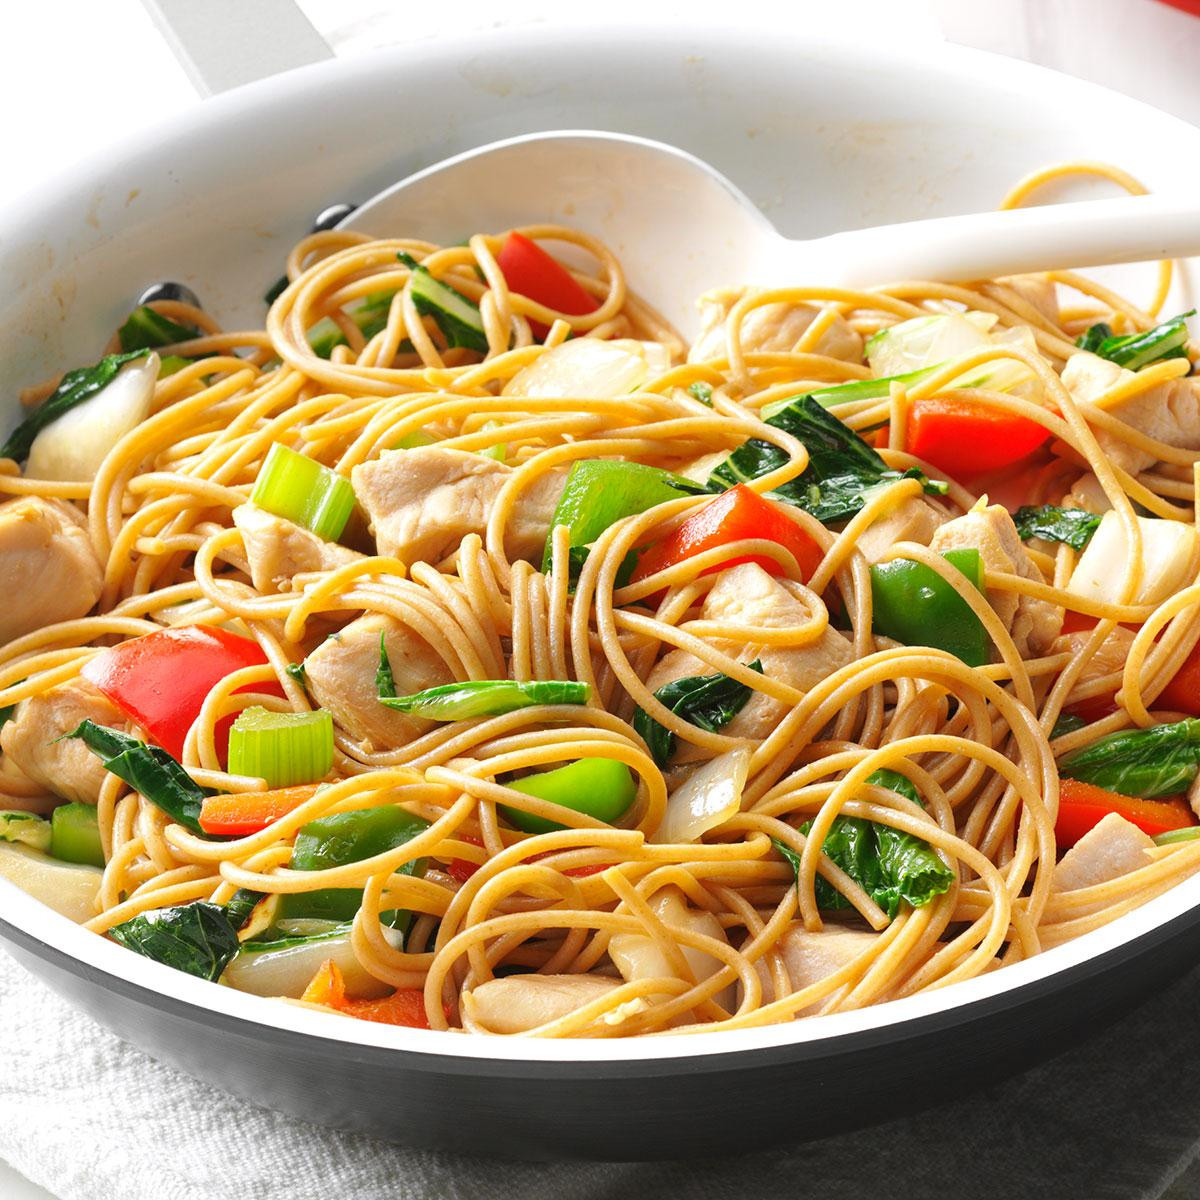 Vegetable Stir Fry With Noodles
 Chicken Stir Fry with Noodles Recipe